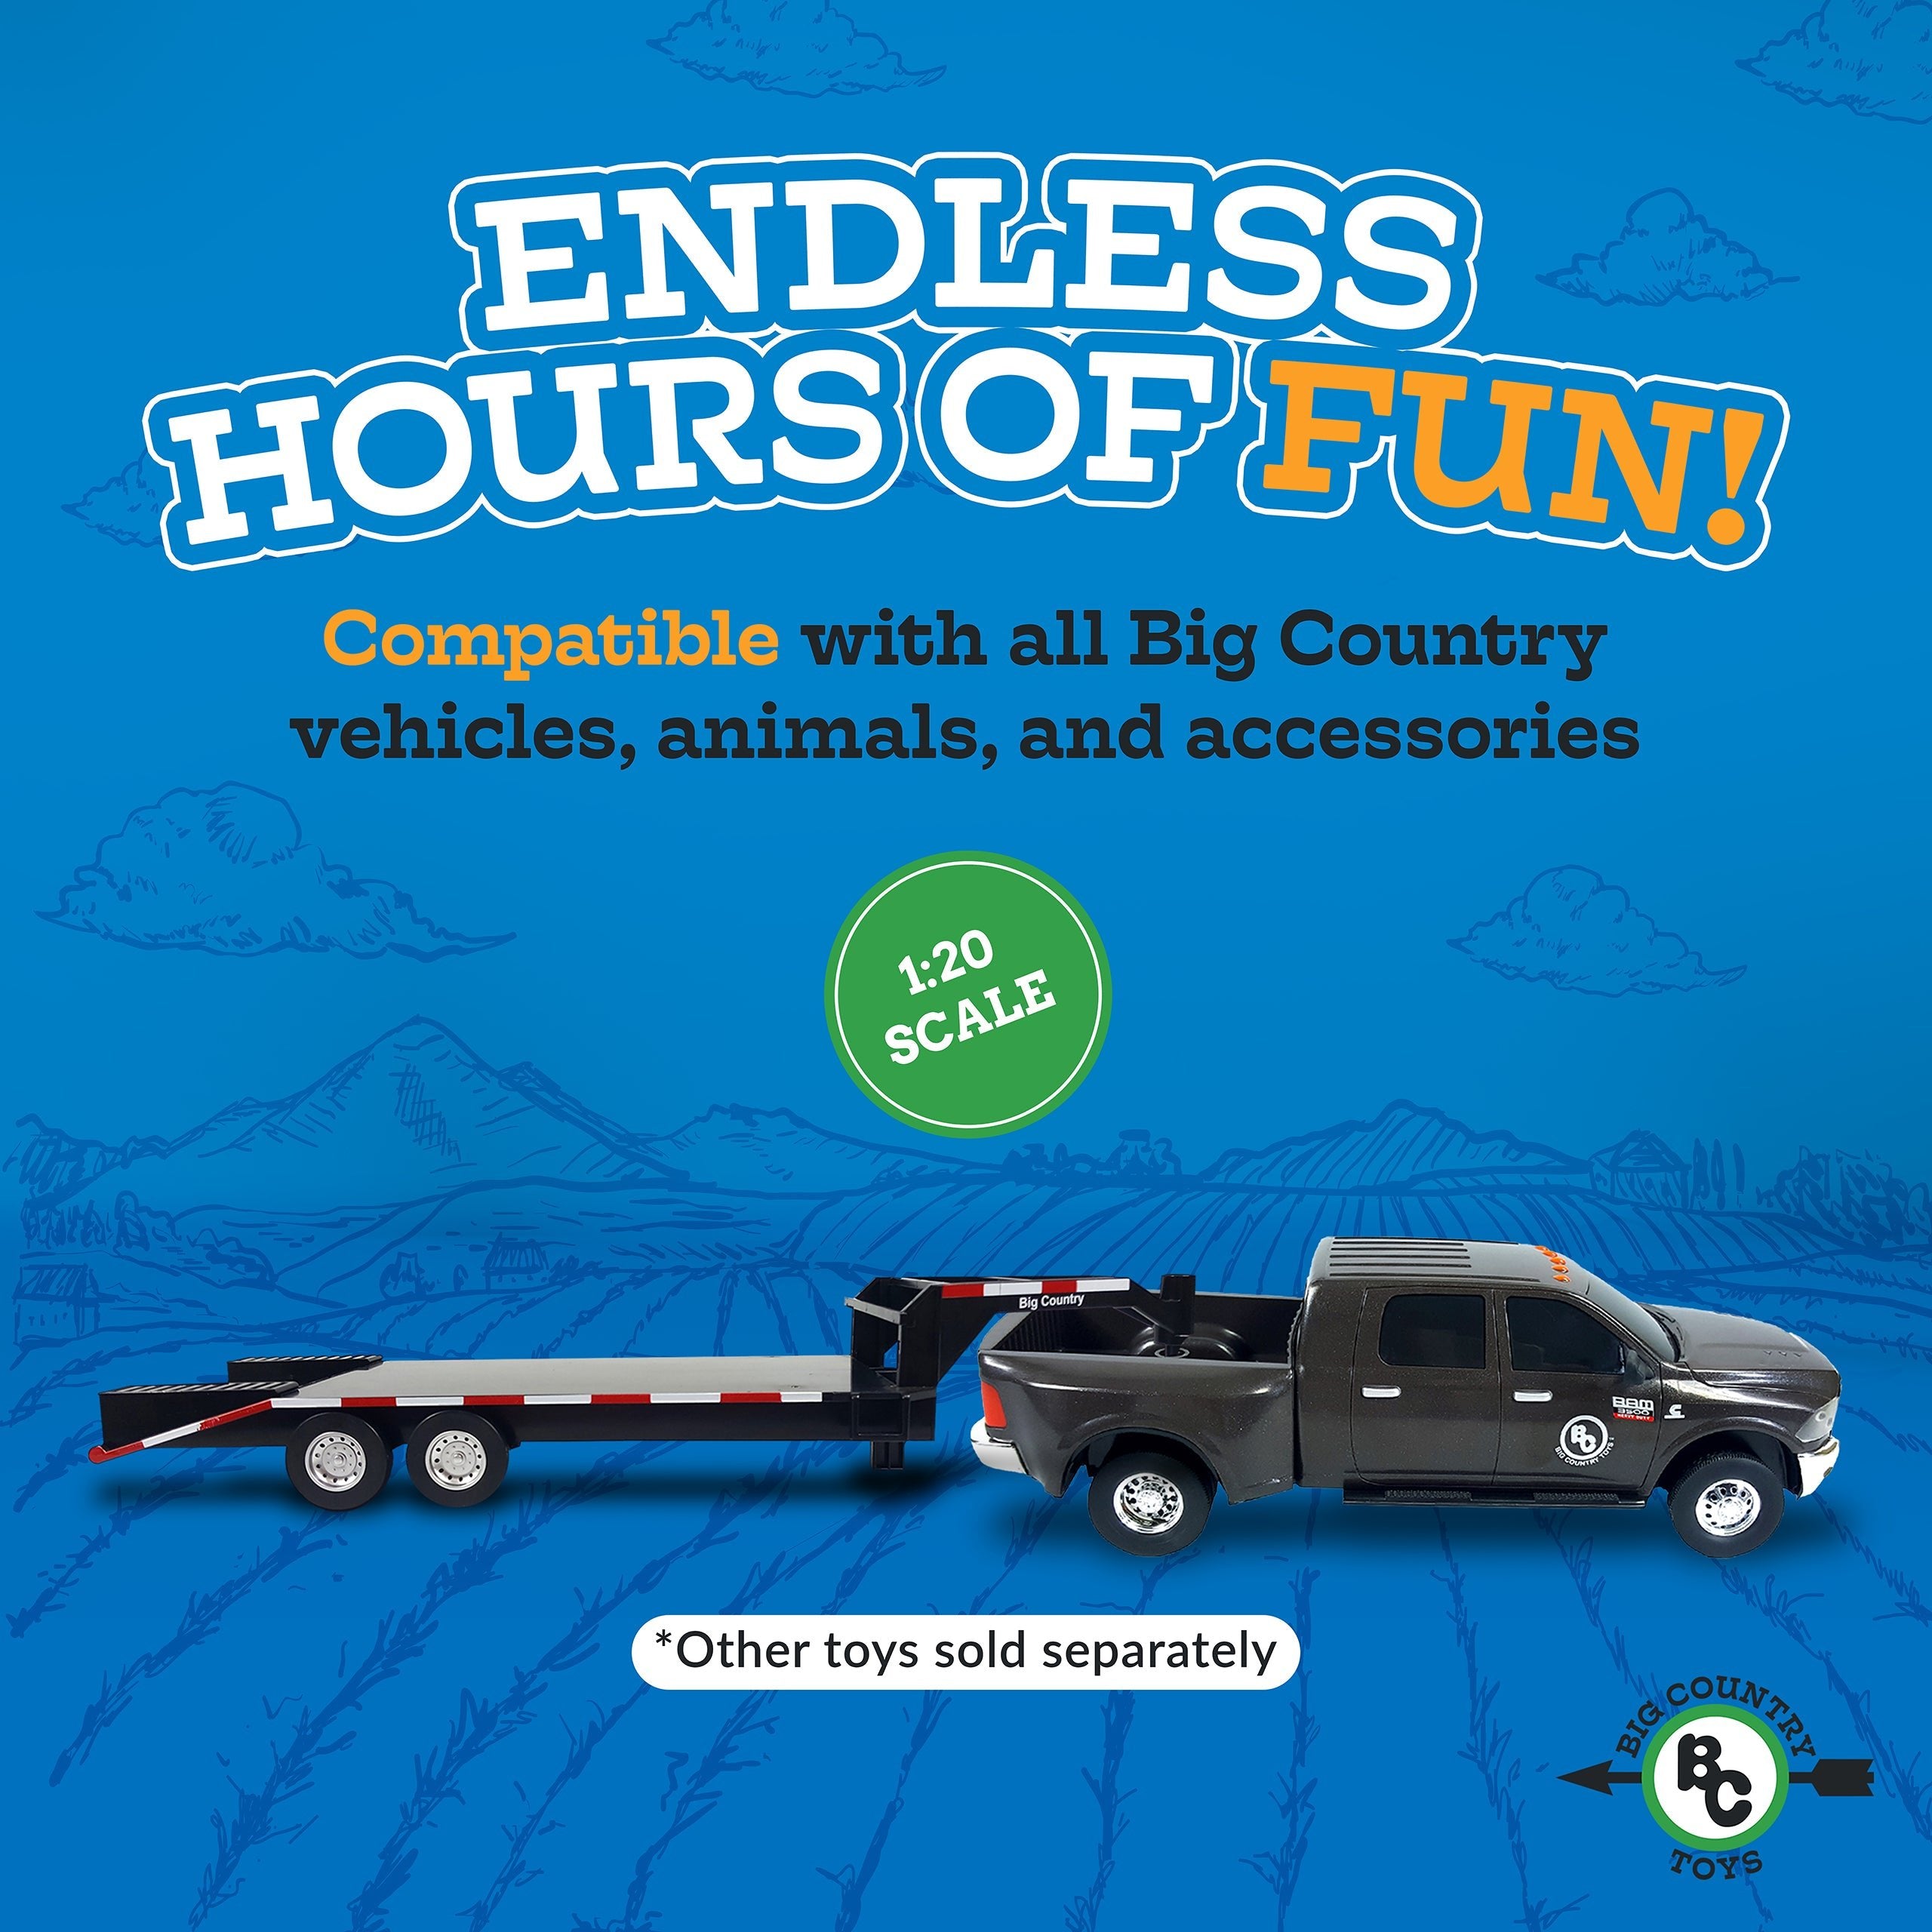 big country toys full line - 9